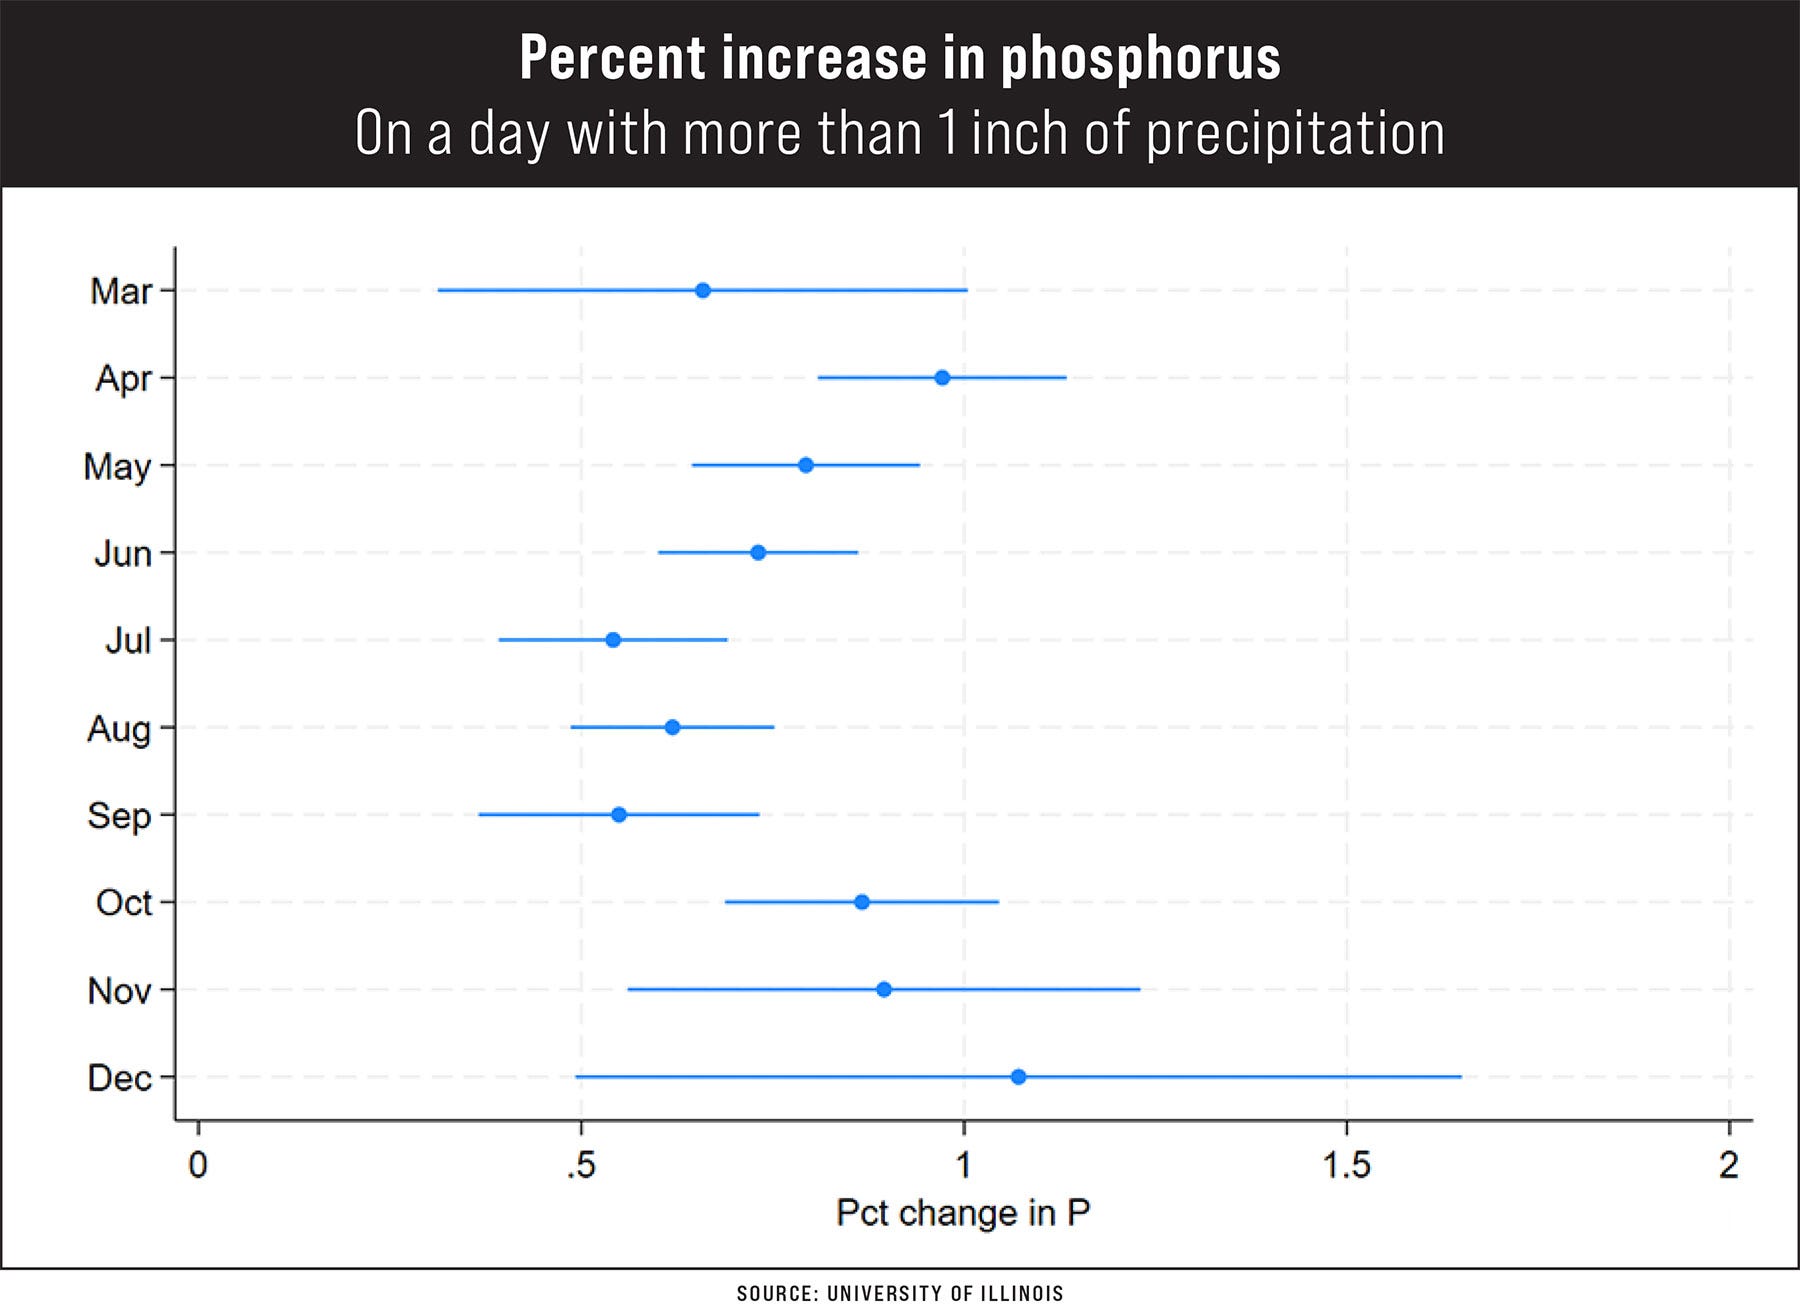 A graph showcasing percent increase in phosphorus
on a day with more than 1 inch of precipitation